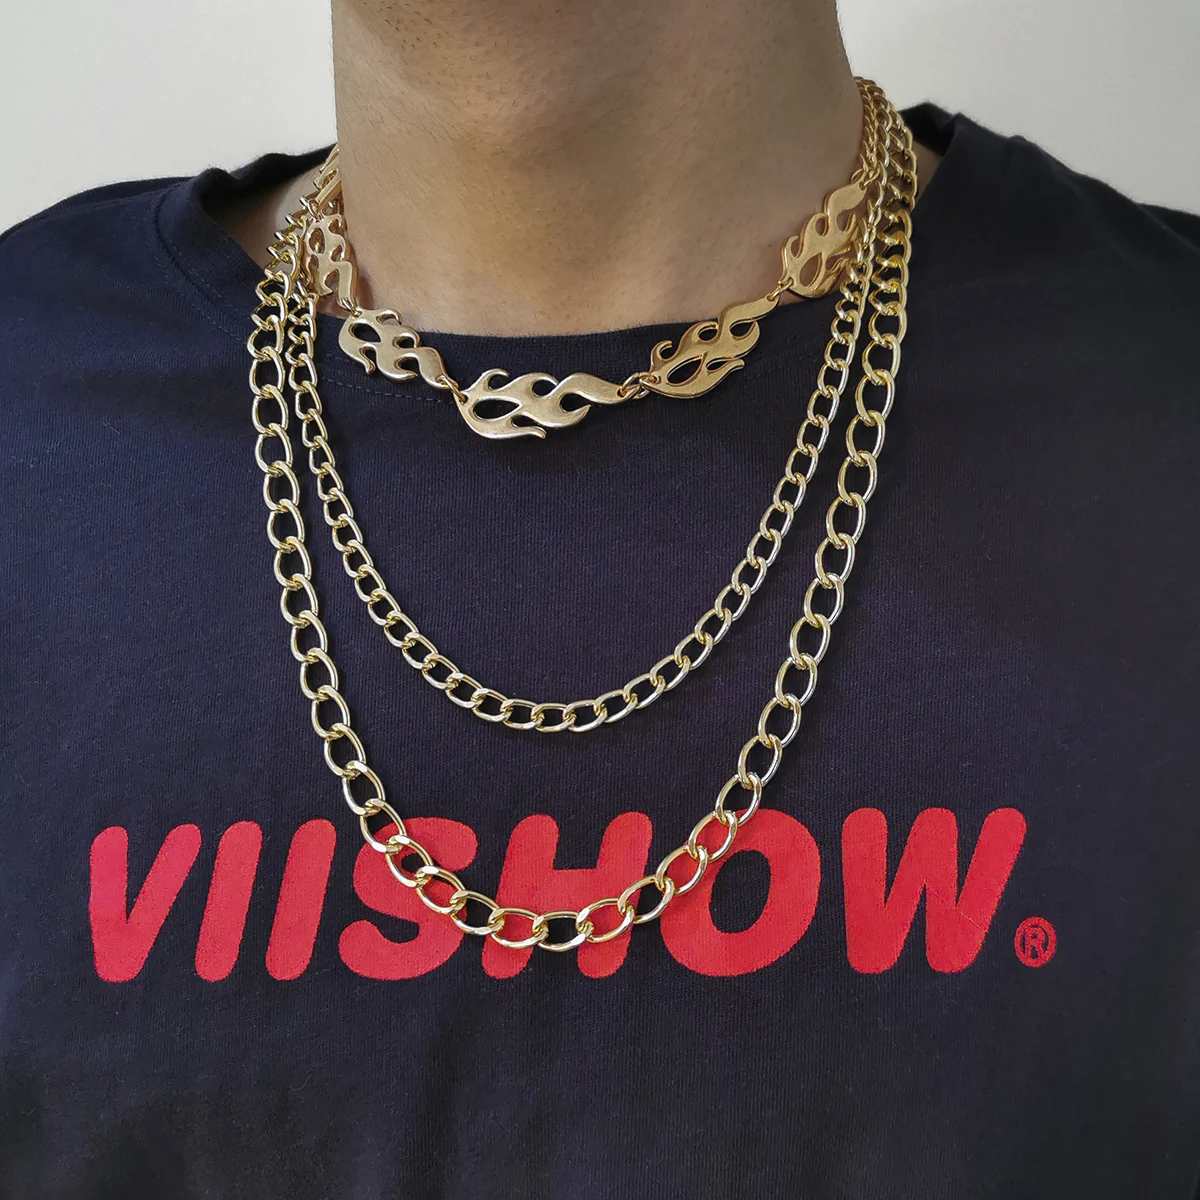 

SHIXIN Fashion Heavy Cuban Chain Necklace Simple Hip hop Men Jewelry 3 Layer Necklace Flame Punk Choker Pendnant Necklace, Gold,silver